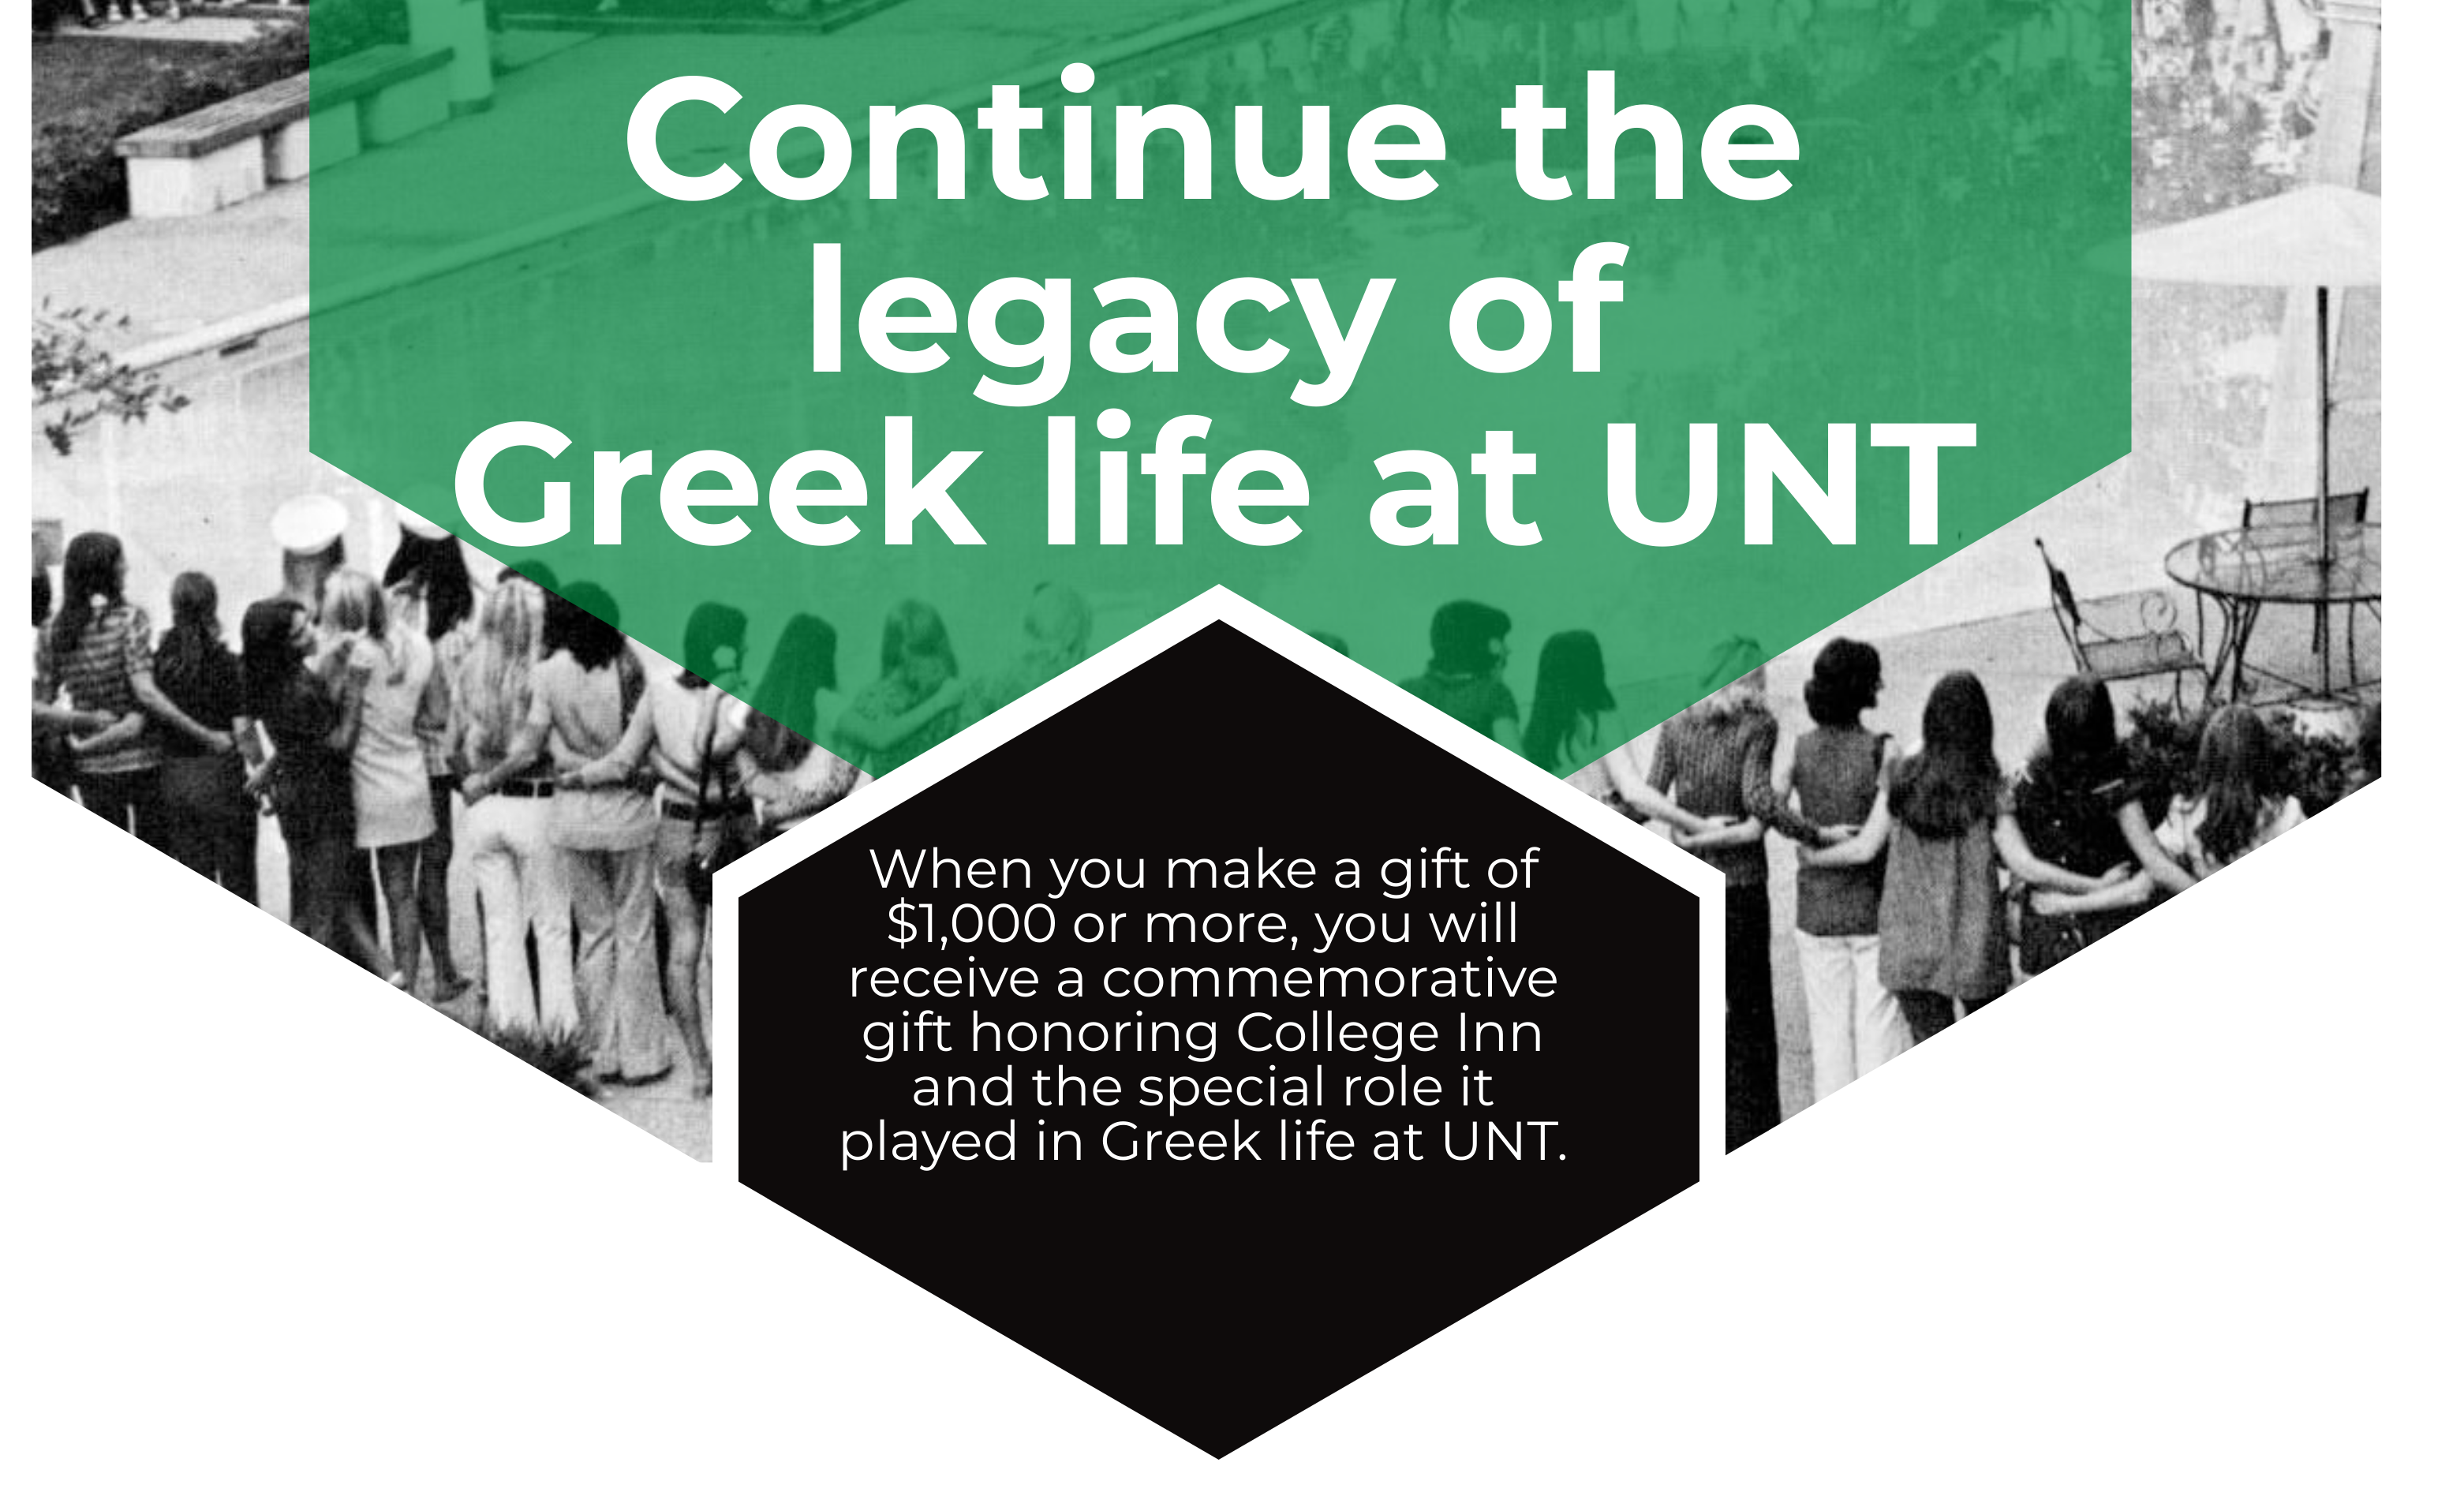 Continue the legacy of Greek life at UNT! When you make a gift of $1,000 or more, you will receive a commemorative gift honoring College Inn and the special role it played in Greek life at UNT. 